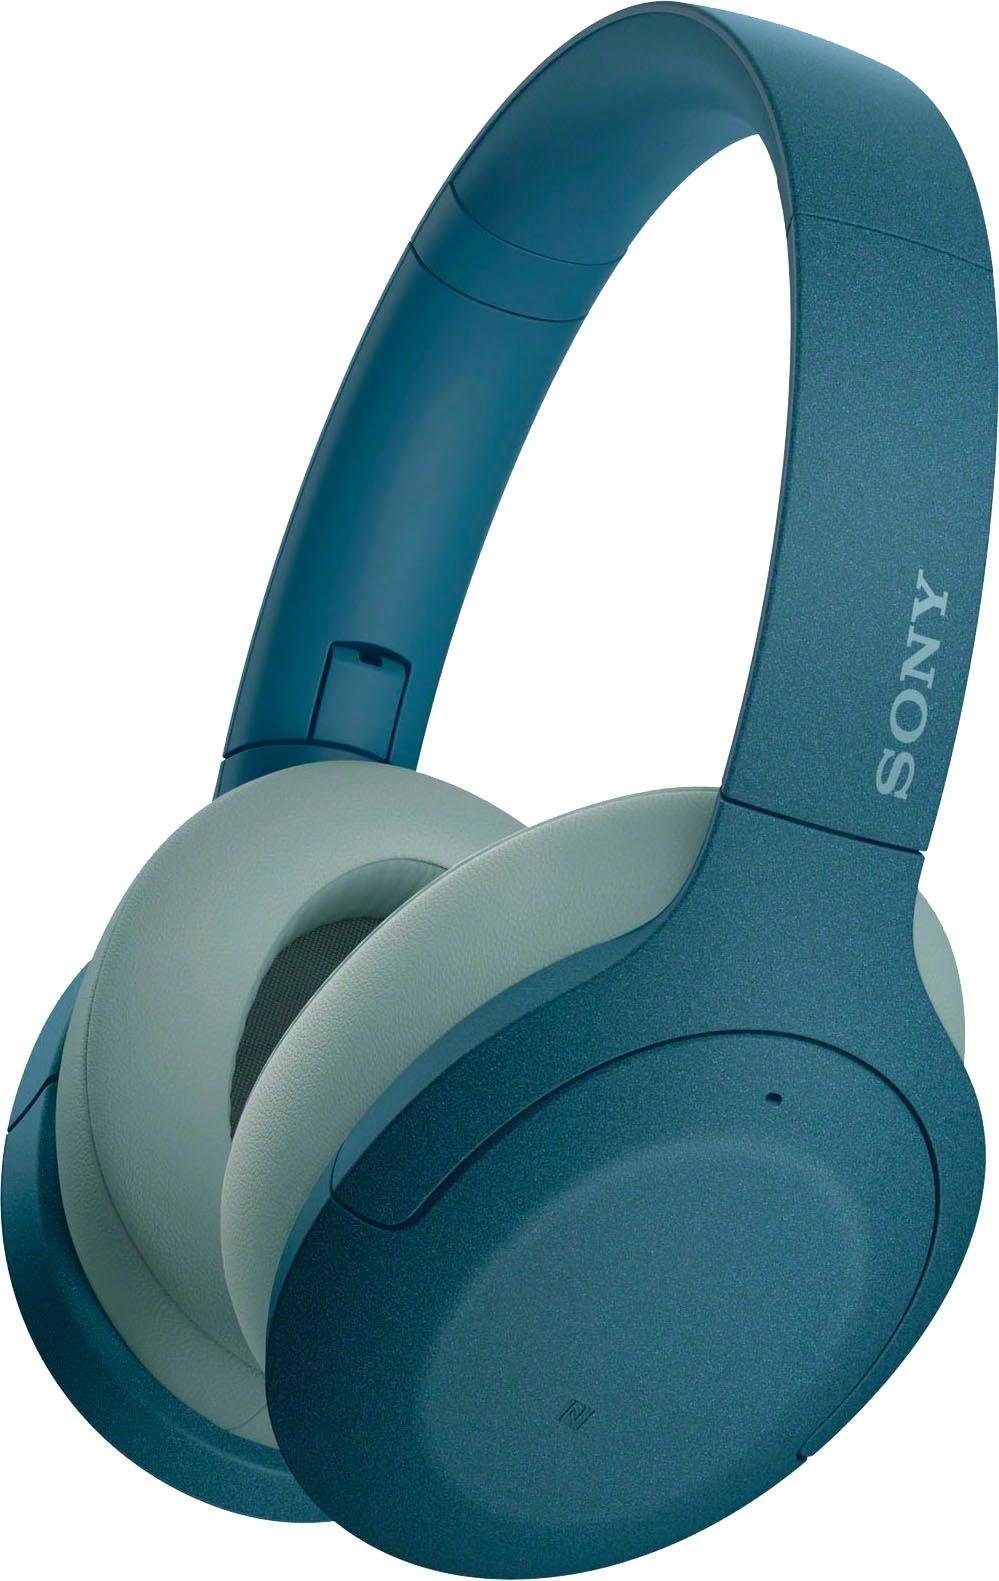 Headset Bluetooth, Mikrofon, WH-H910N Sprachassistent) Noise-Cancelling, mit Bluetooth-Kopfhörer (Hi-Res, Assistant, Sony Google